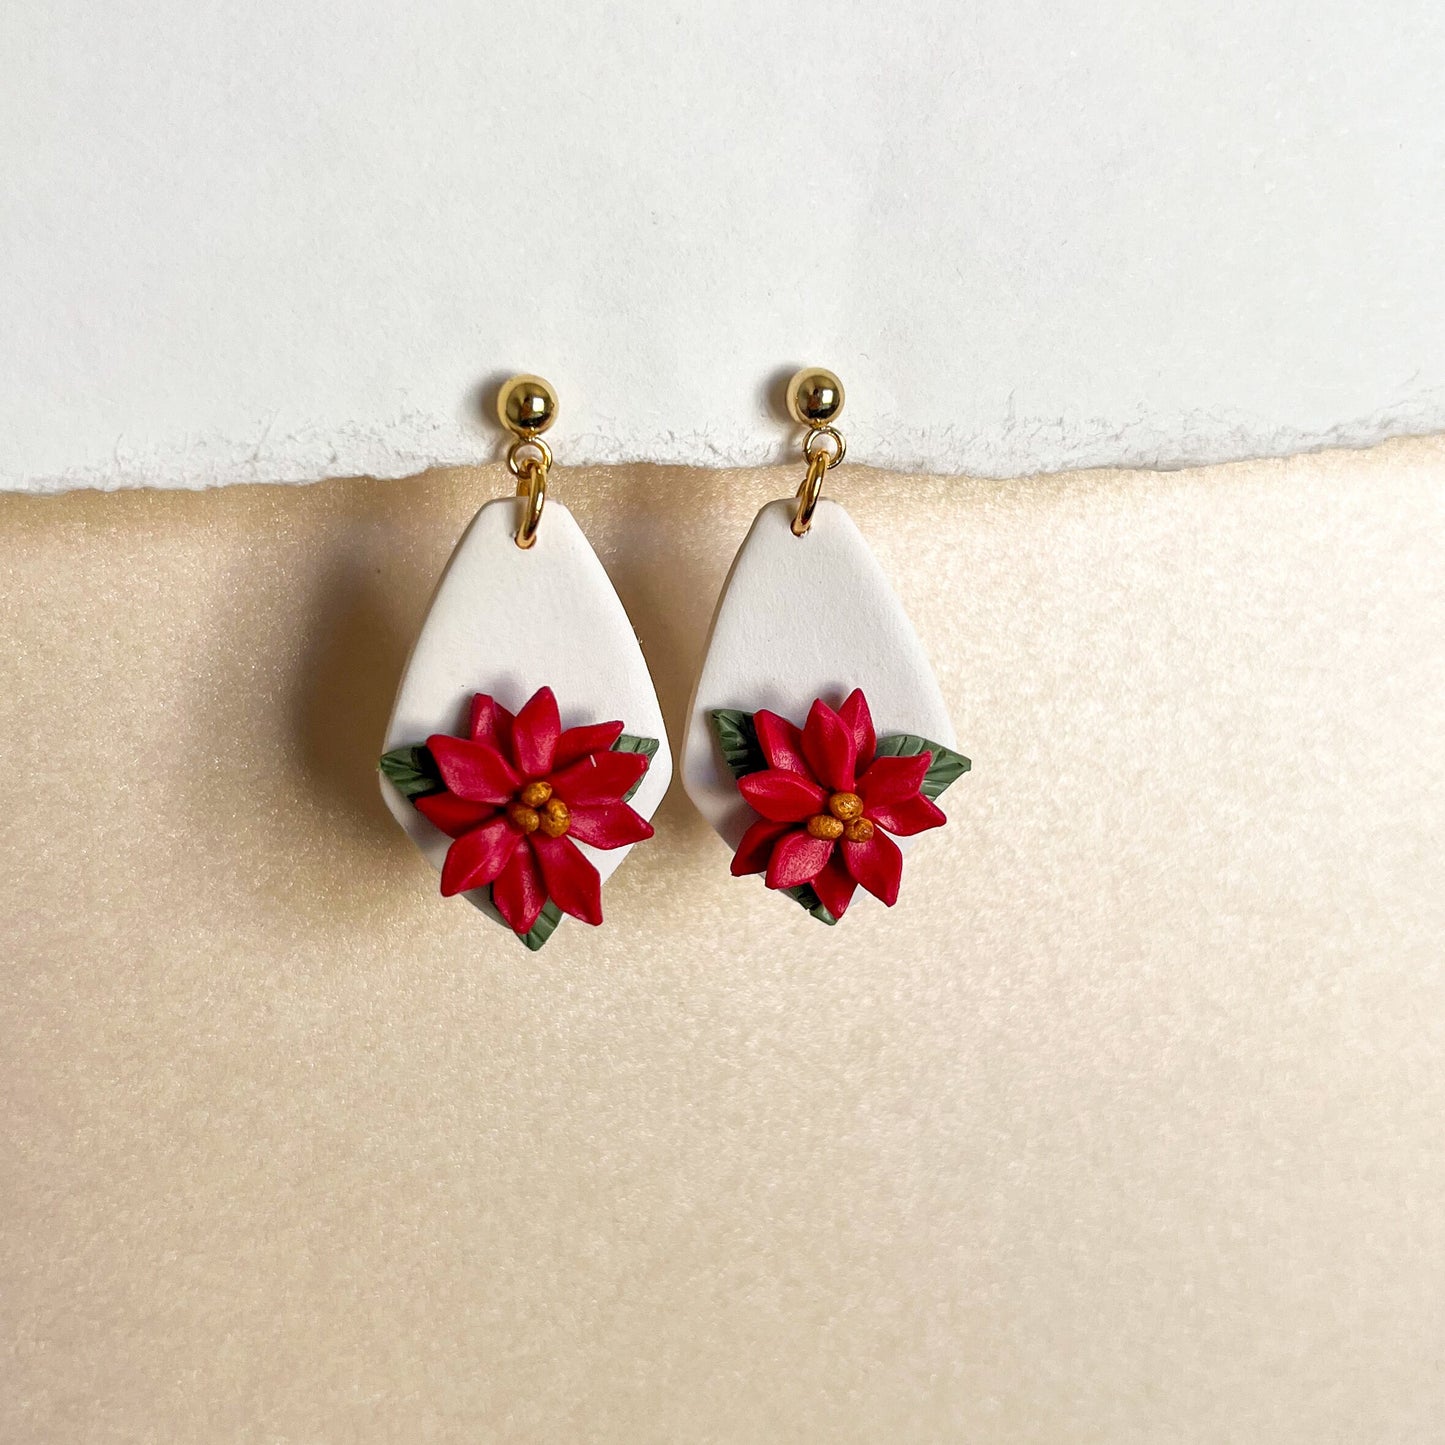 White earrings with poinsettia detail | 24k gold plated